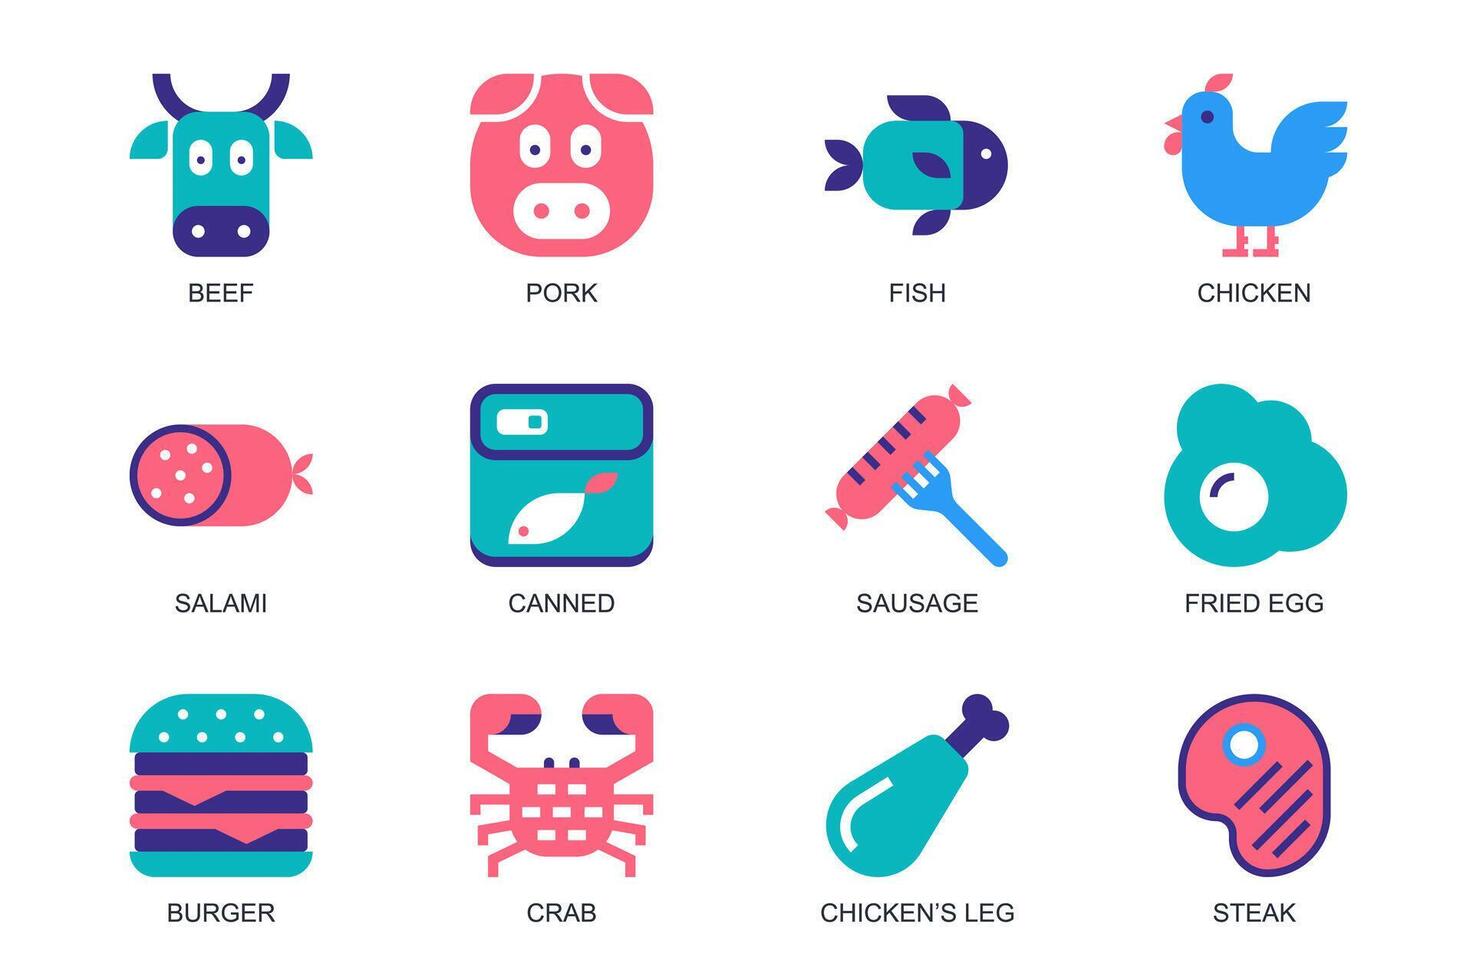 Meat, Fish and Poultry concept of web icons set in simple flat design. Pack of beef, pork, chicken, salami, canned food, sausage, fried egg, burger, crab and other. pictograms for mobile app vector